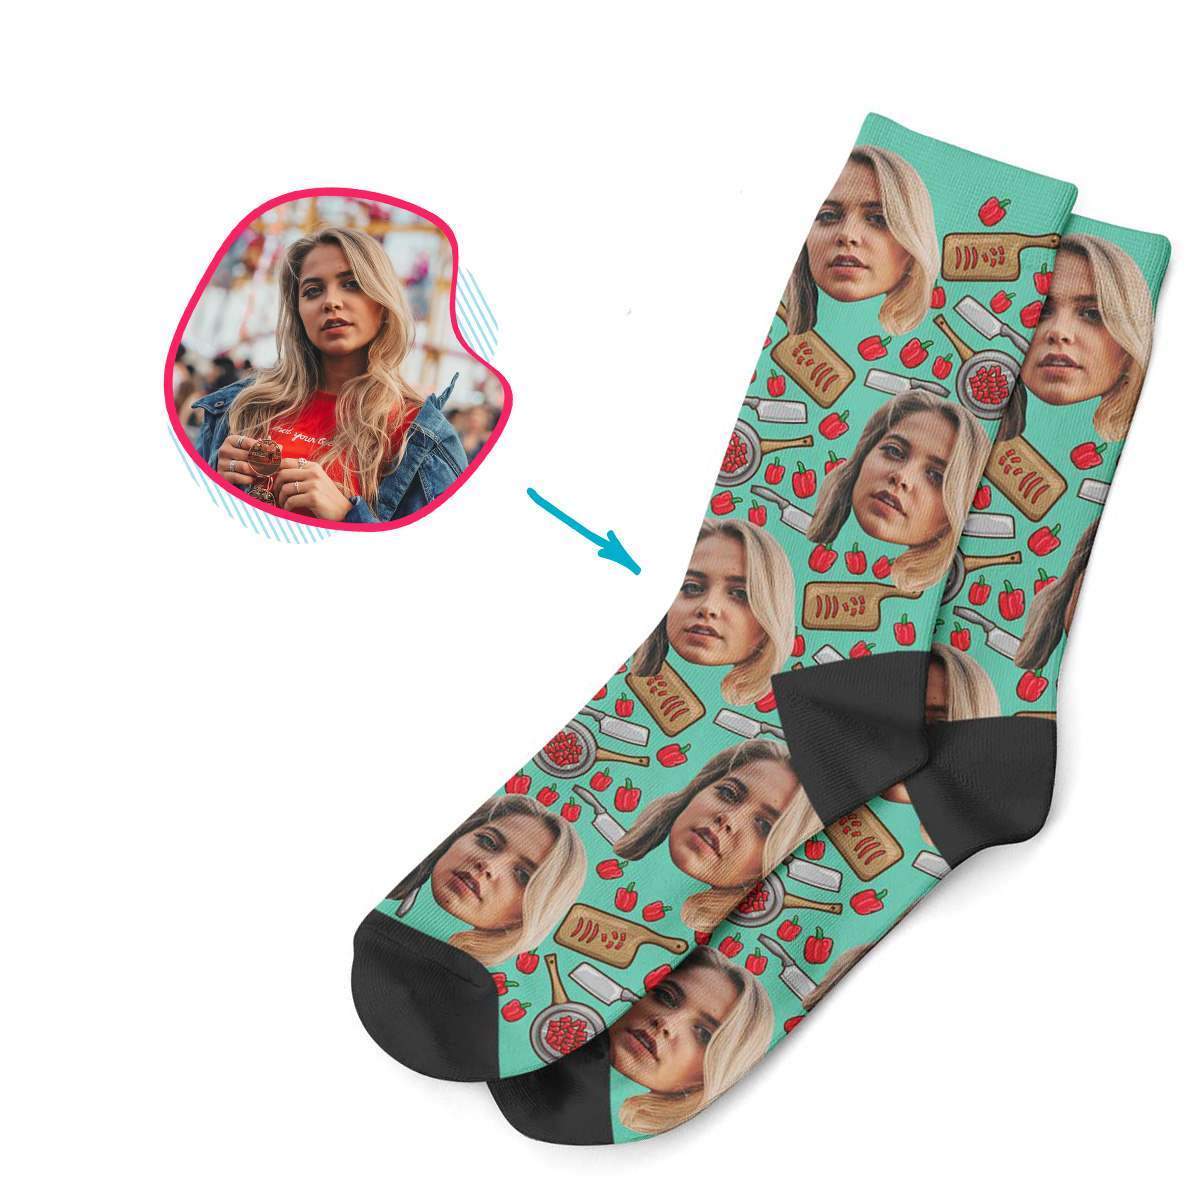 mint Сooking socks personalized with photo of face printed on them